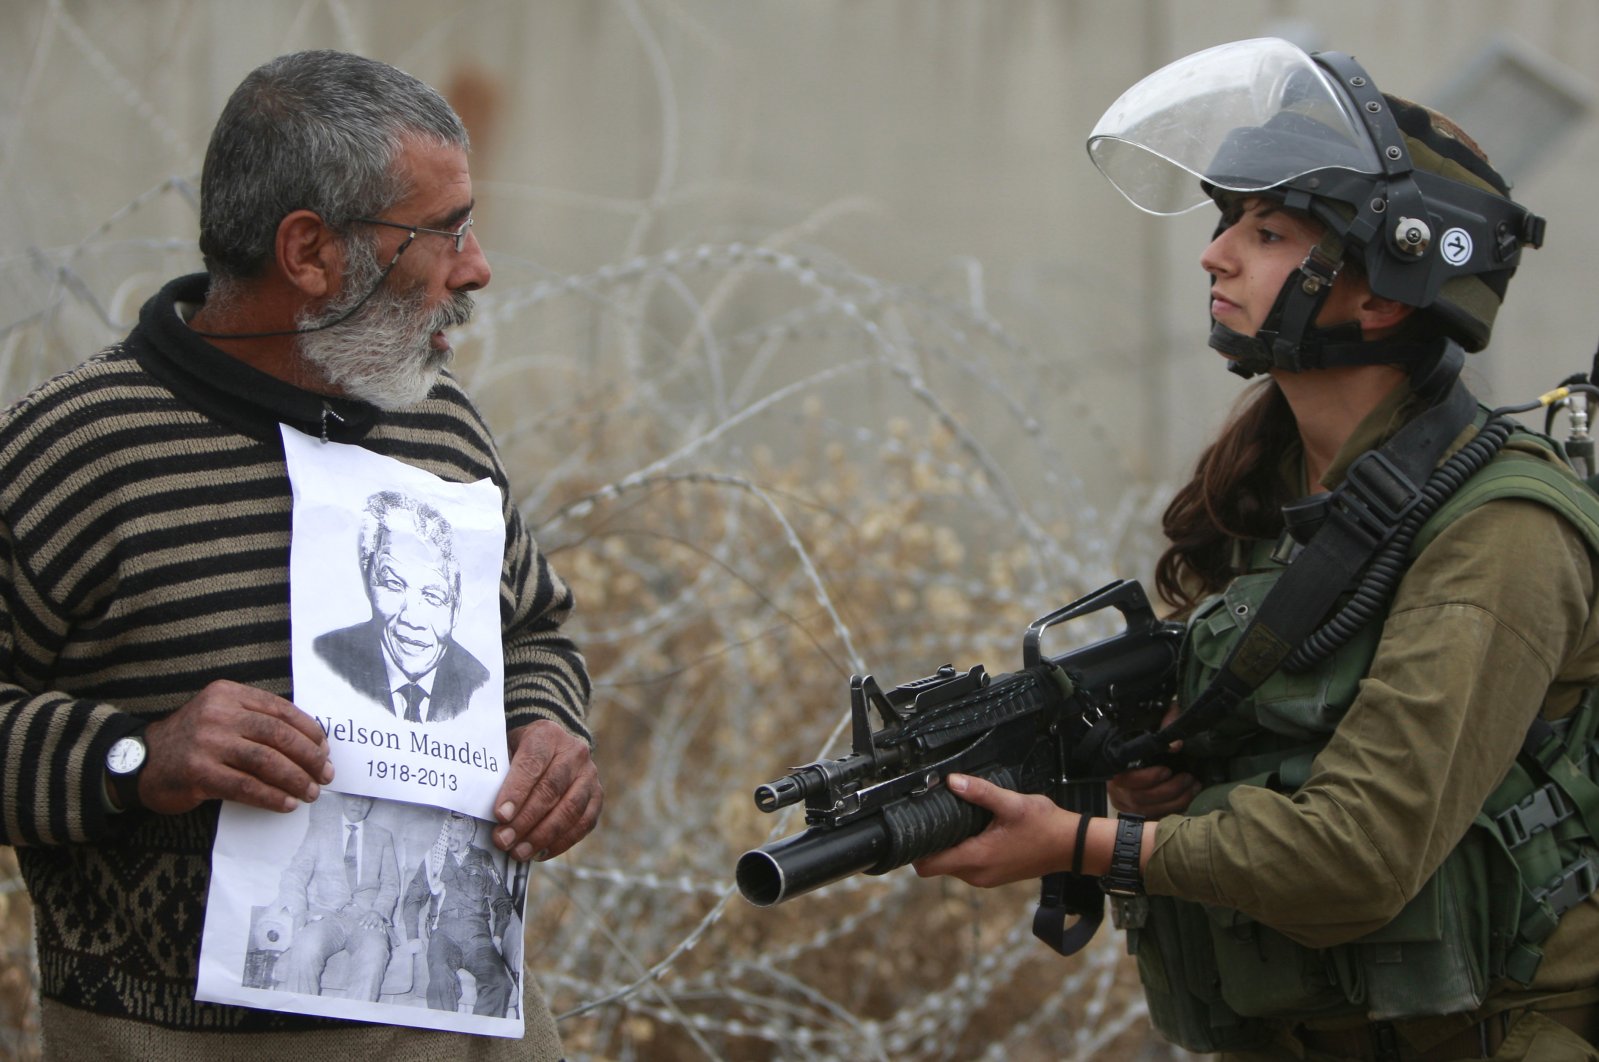 A Palestinian demonstrator holds portraits of late South African leader Nelson Mandela and late Palestinian leader Yasser Arafat as he stands in front of an Israeli soldier during a weekly demonstration against Israel&#039;s separation barrier, in the West Bank village of Bilin, near Ramallah, Dec. 6, 2013. (AP Photo)